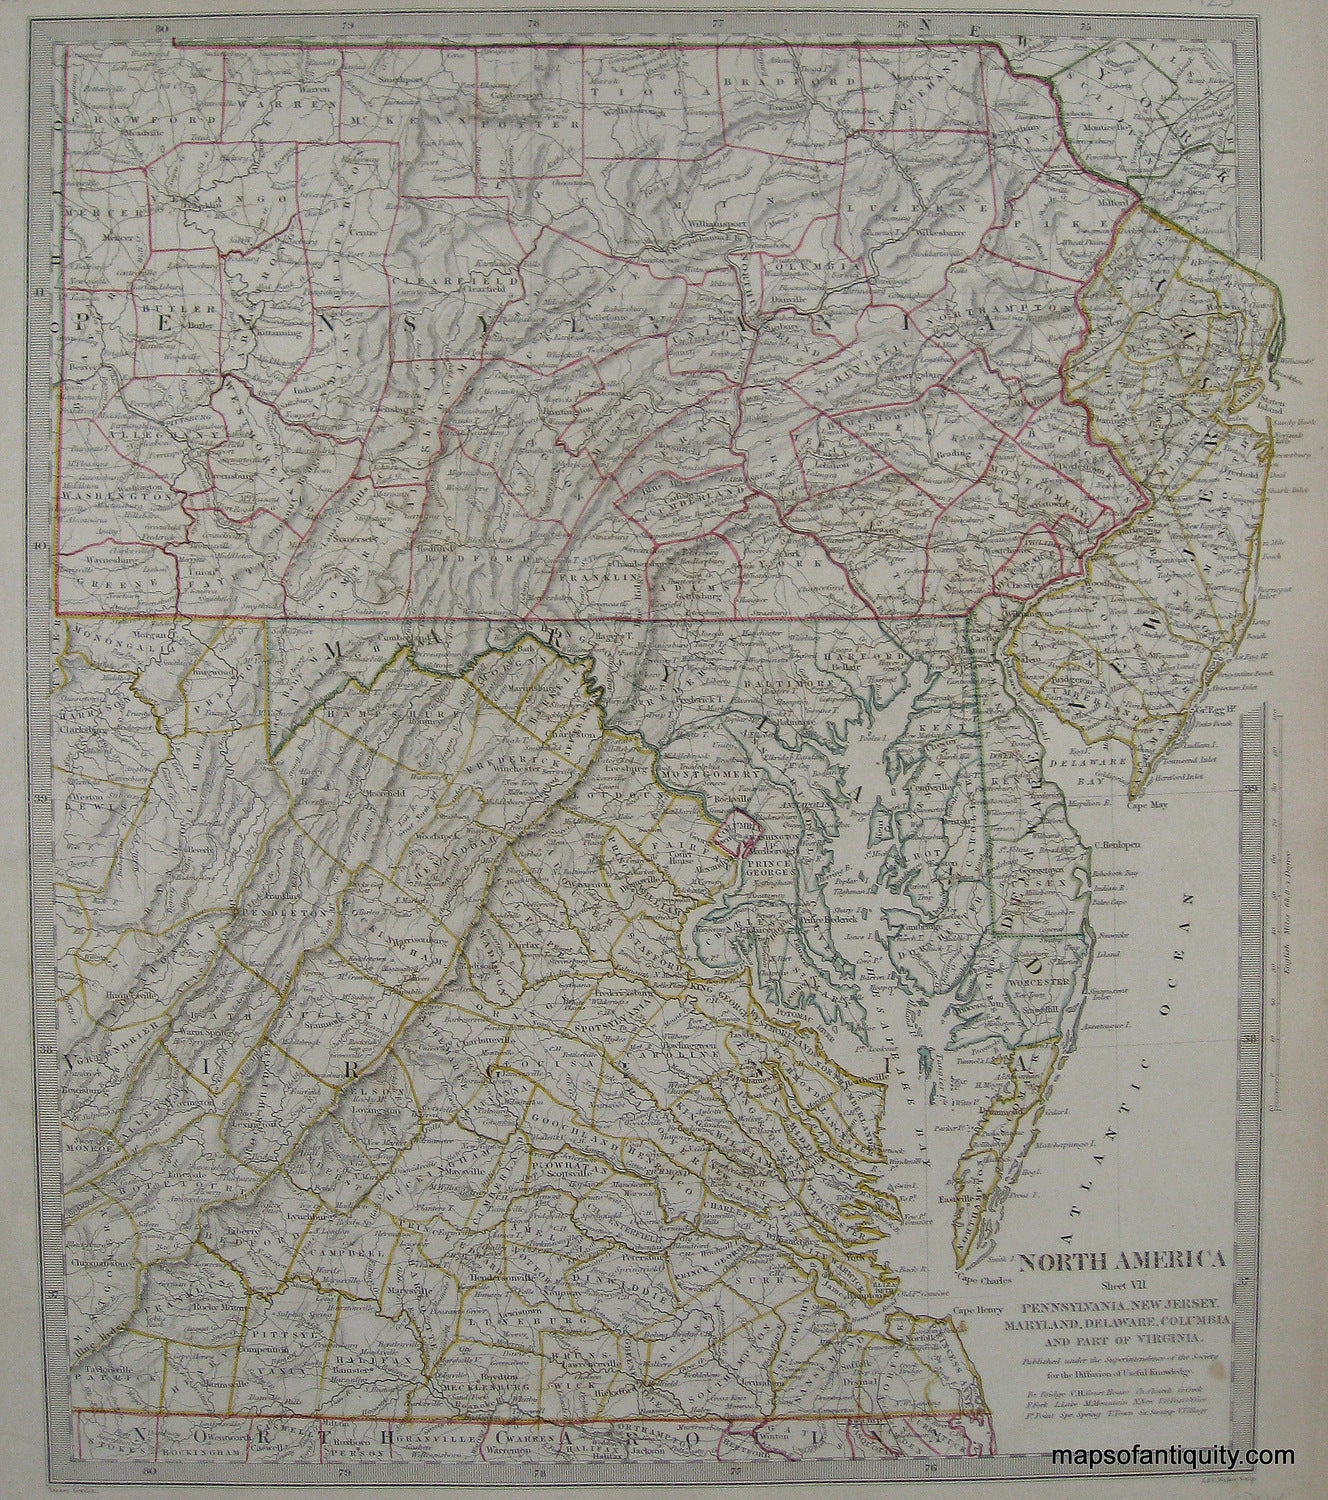 Antique-Hand-Colored-Map-North-America-Sheet-VII-Pennsylvania-New-Jersey-Maryland-Delaware-Columbia-and-part-of-Virginia.--United-States-Mid-Atlantic-1840/1844-SDUK/Society-for-the-Diffusion-of-Useful-Knowledge-Maps-Of-Antiquity